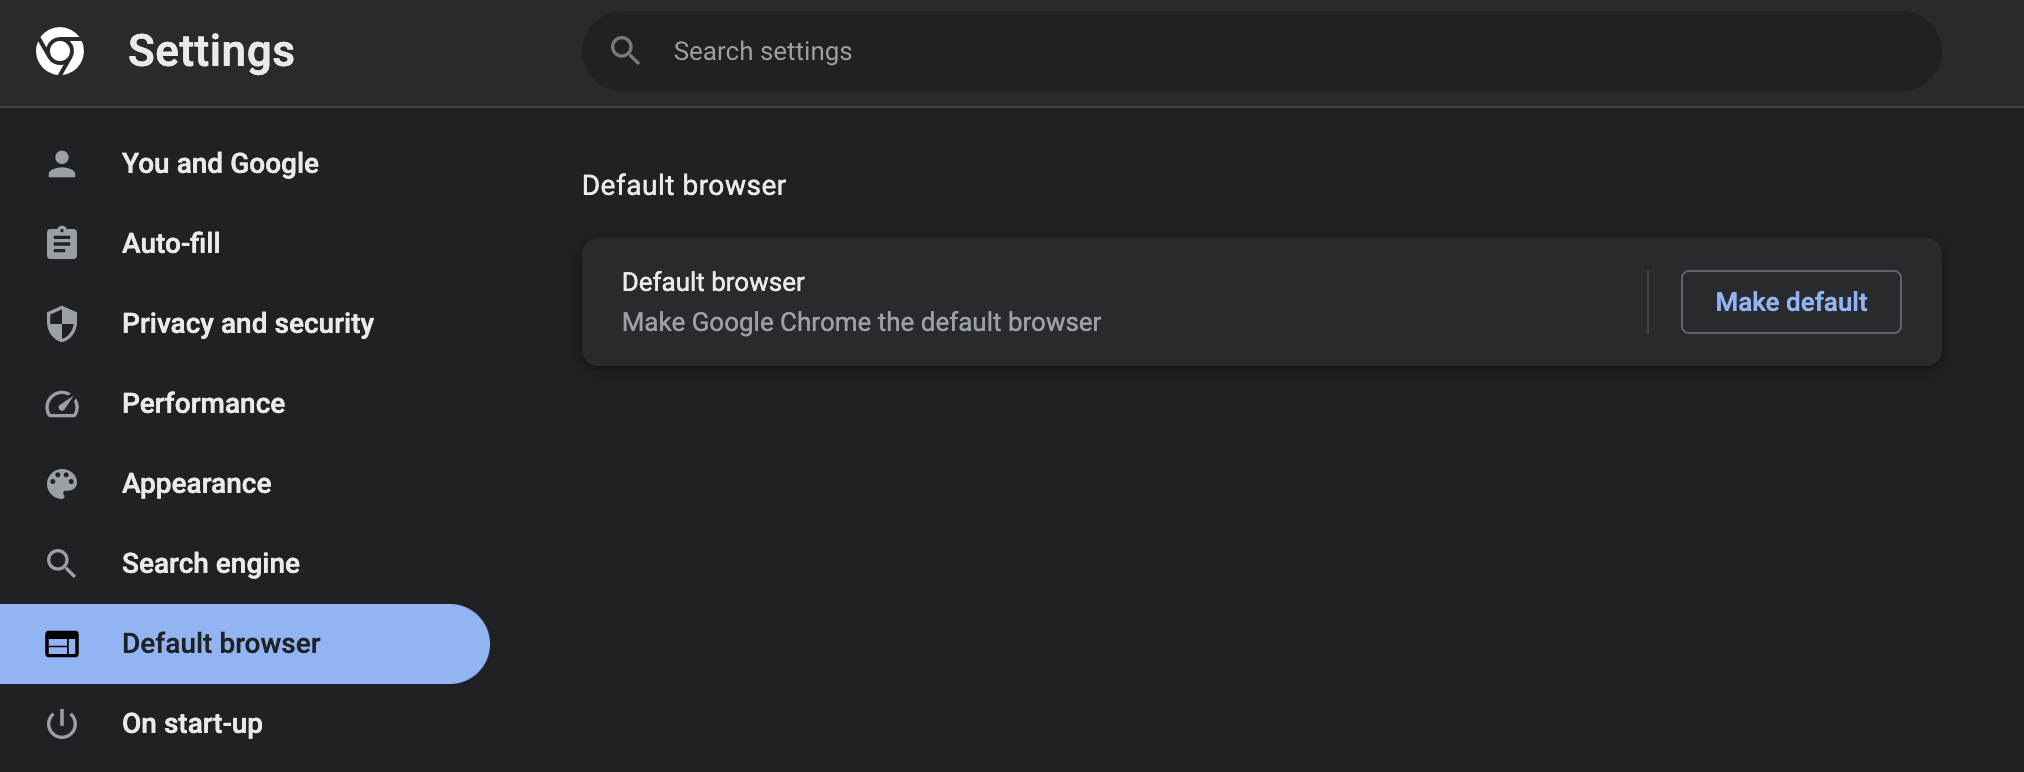 The “Default browser” menu in Chrome